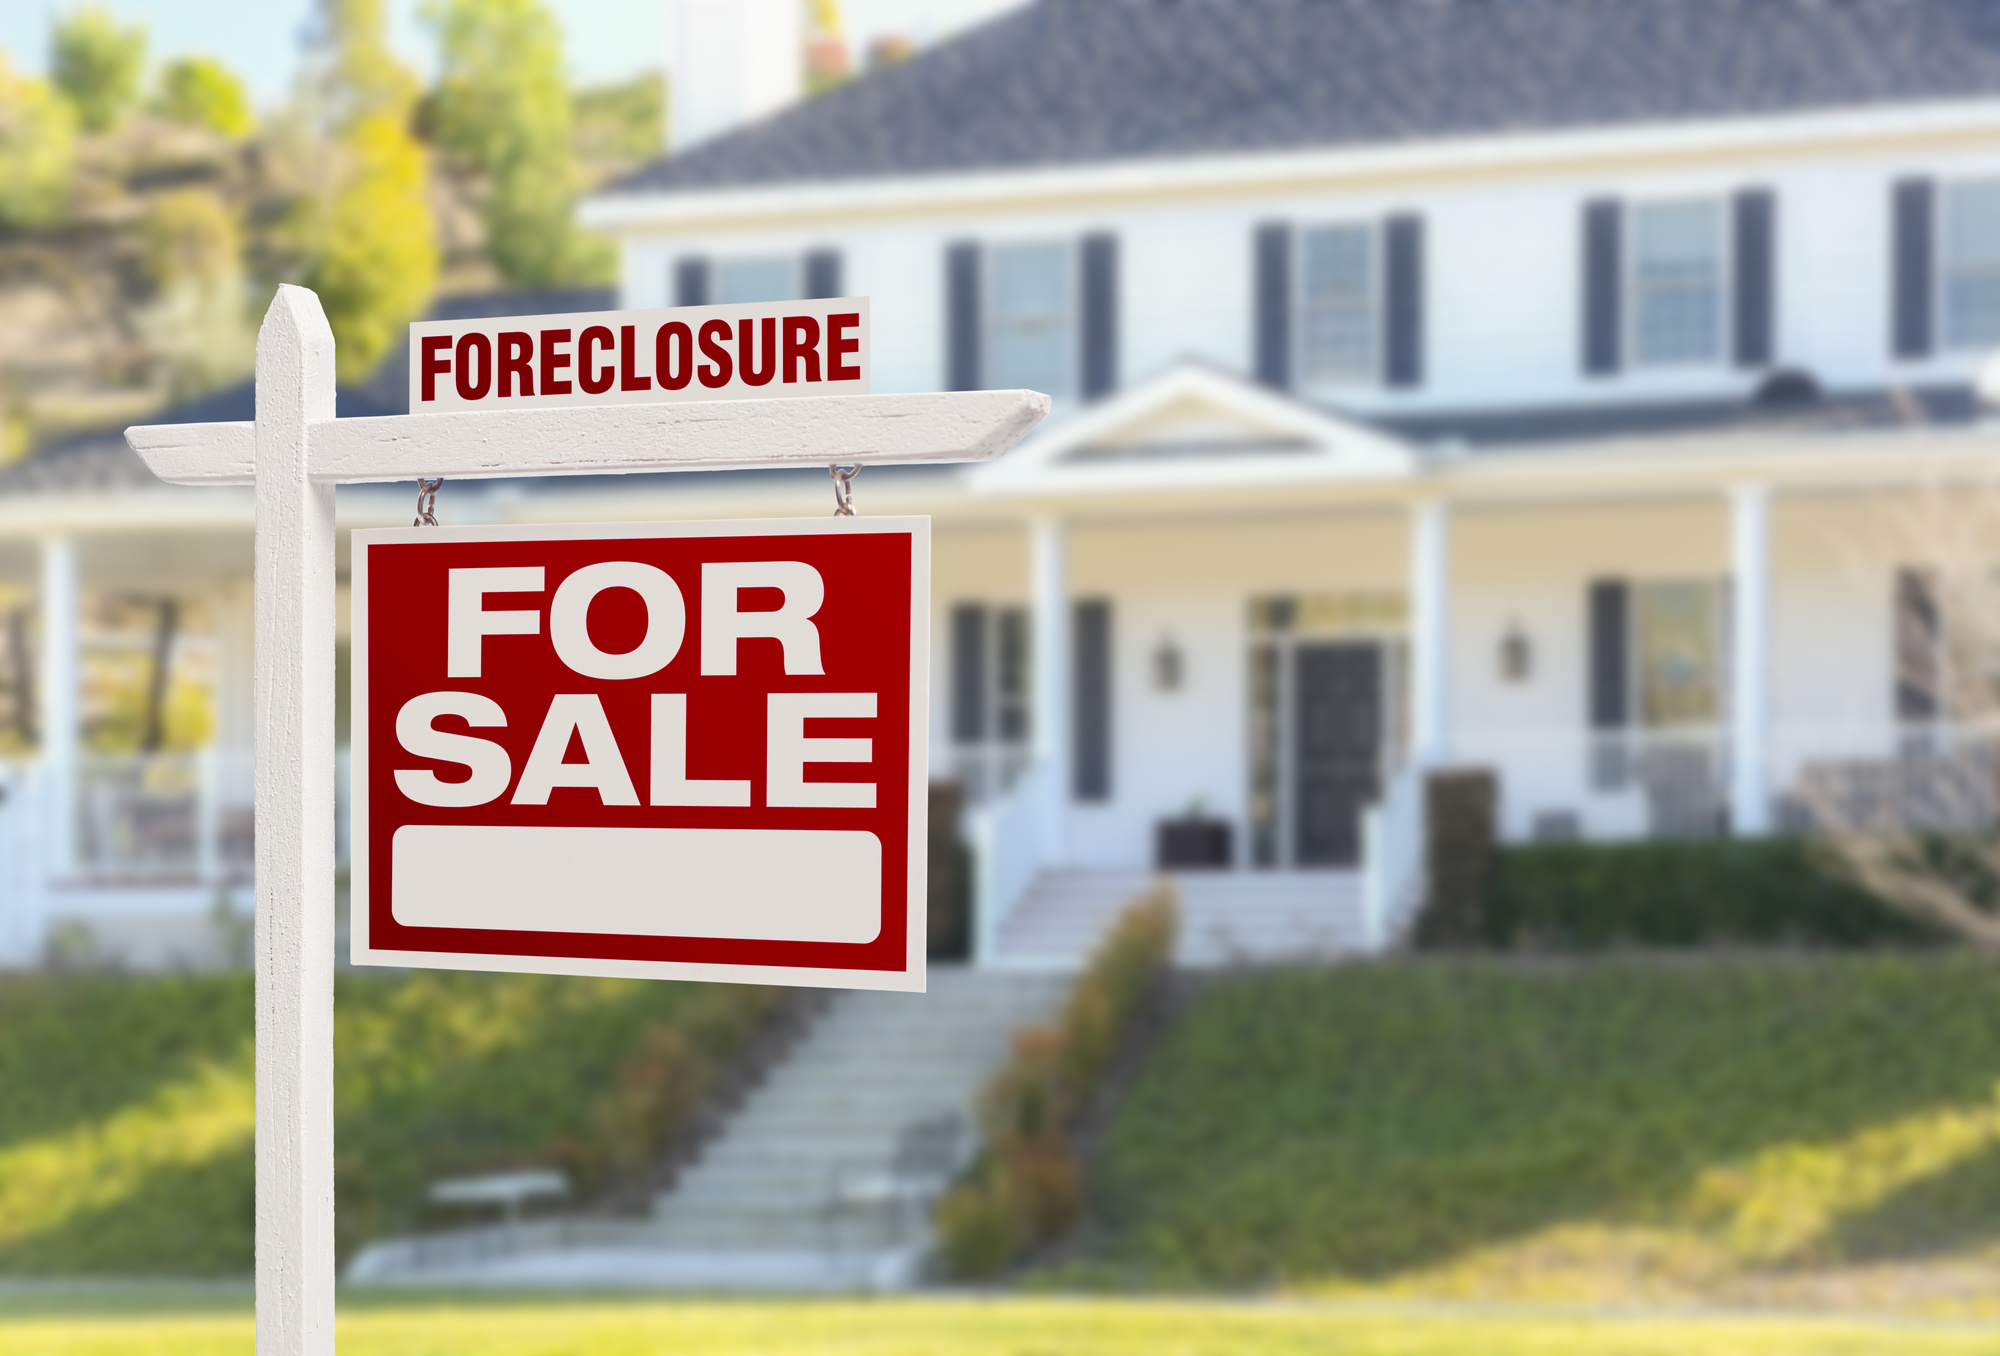 Foreclosure Sale: Can You Sell Your Property In Pre-Foreclosure?